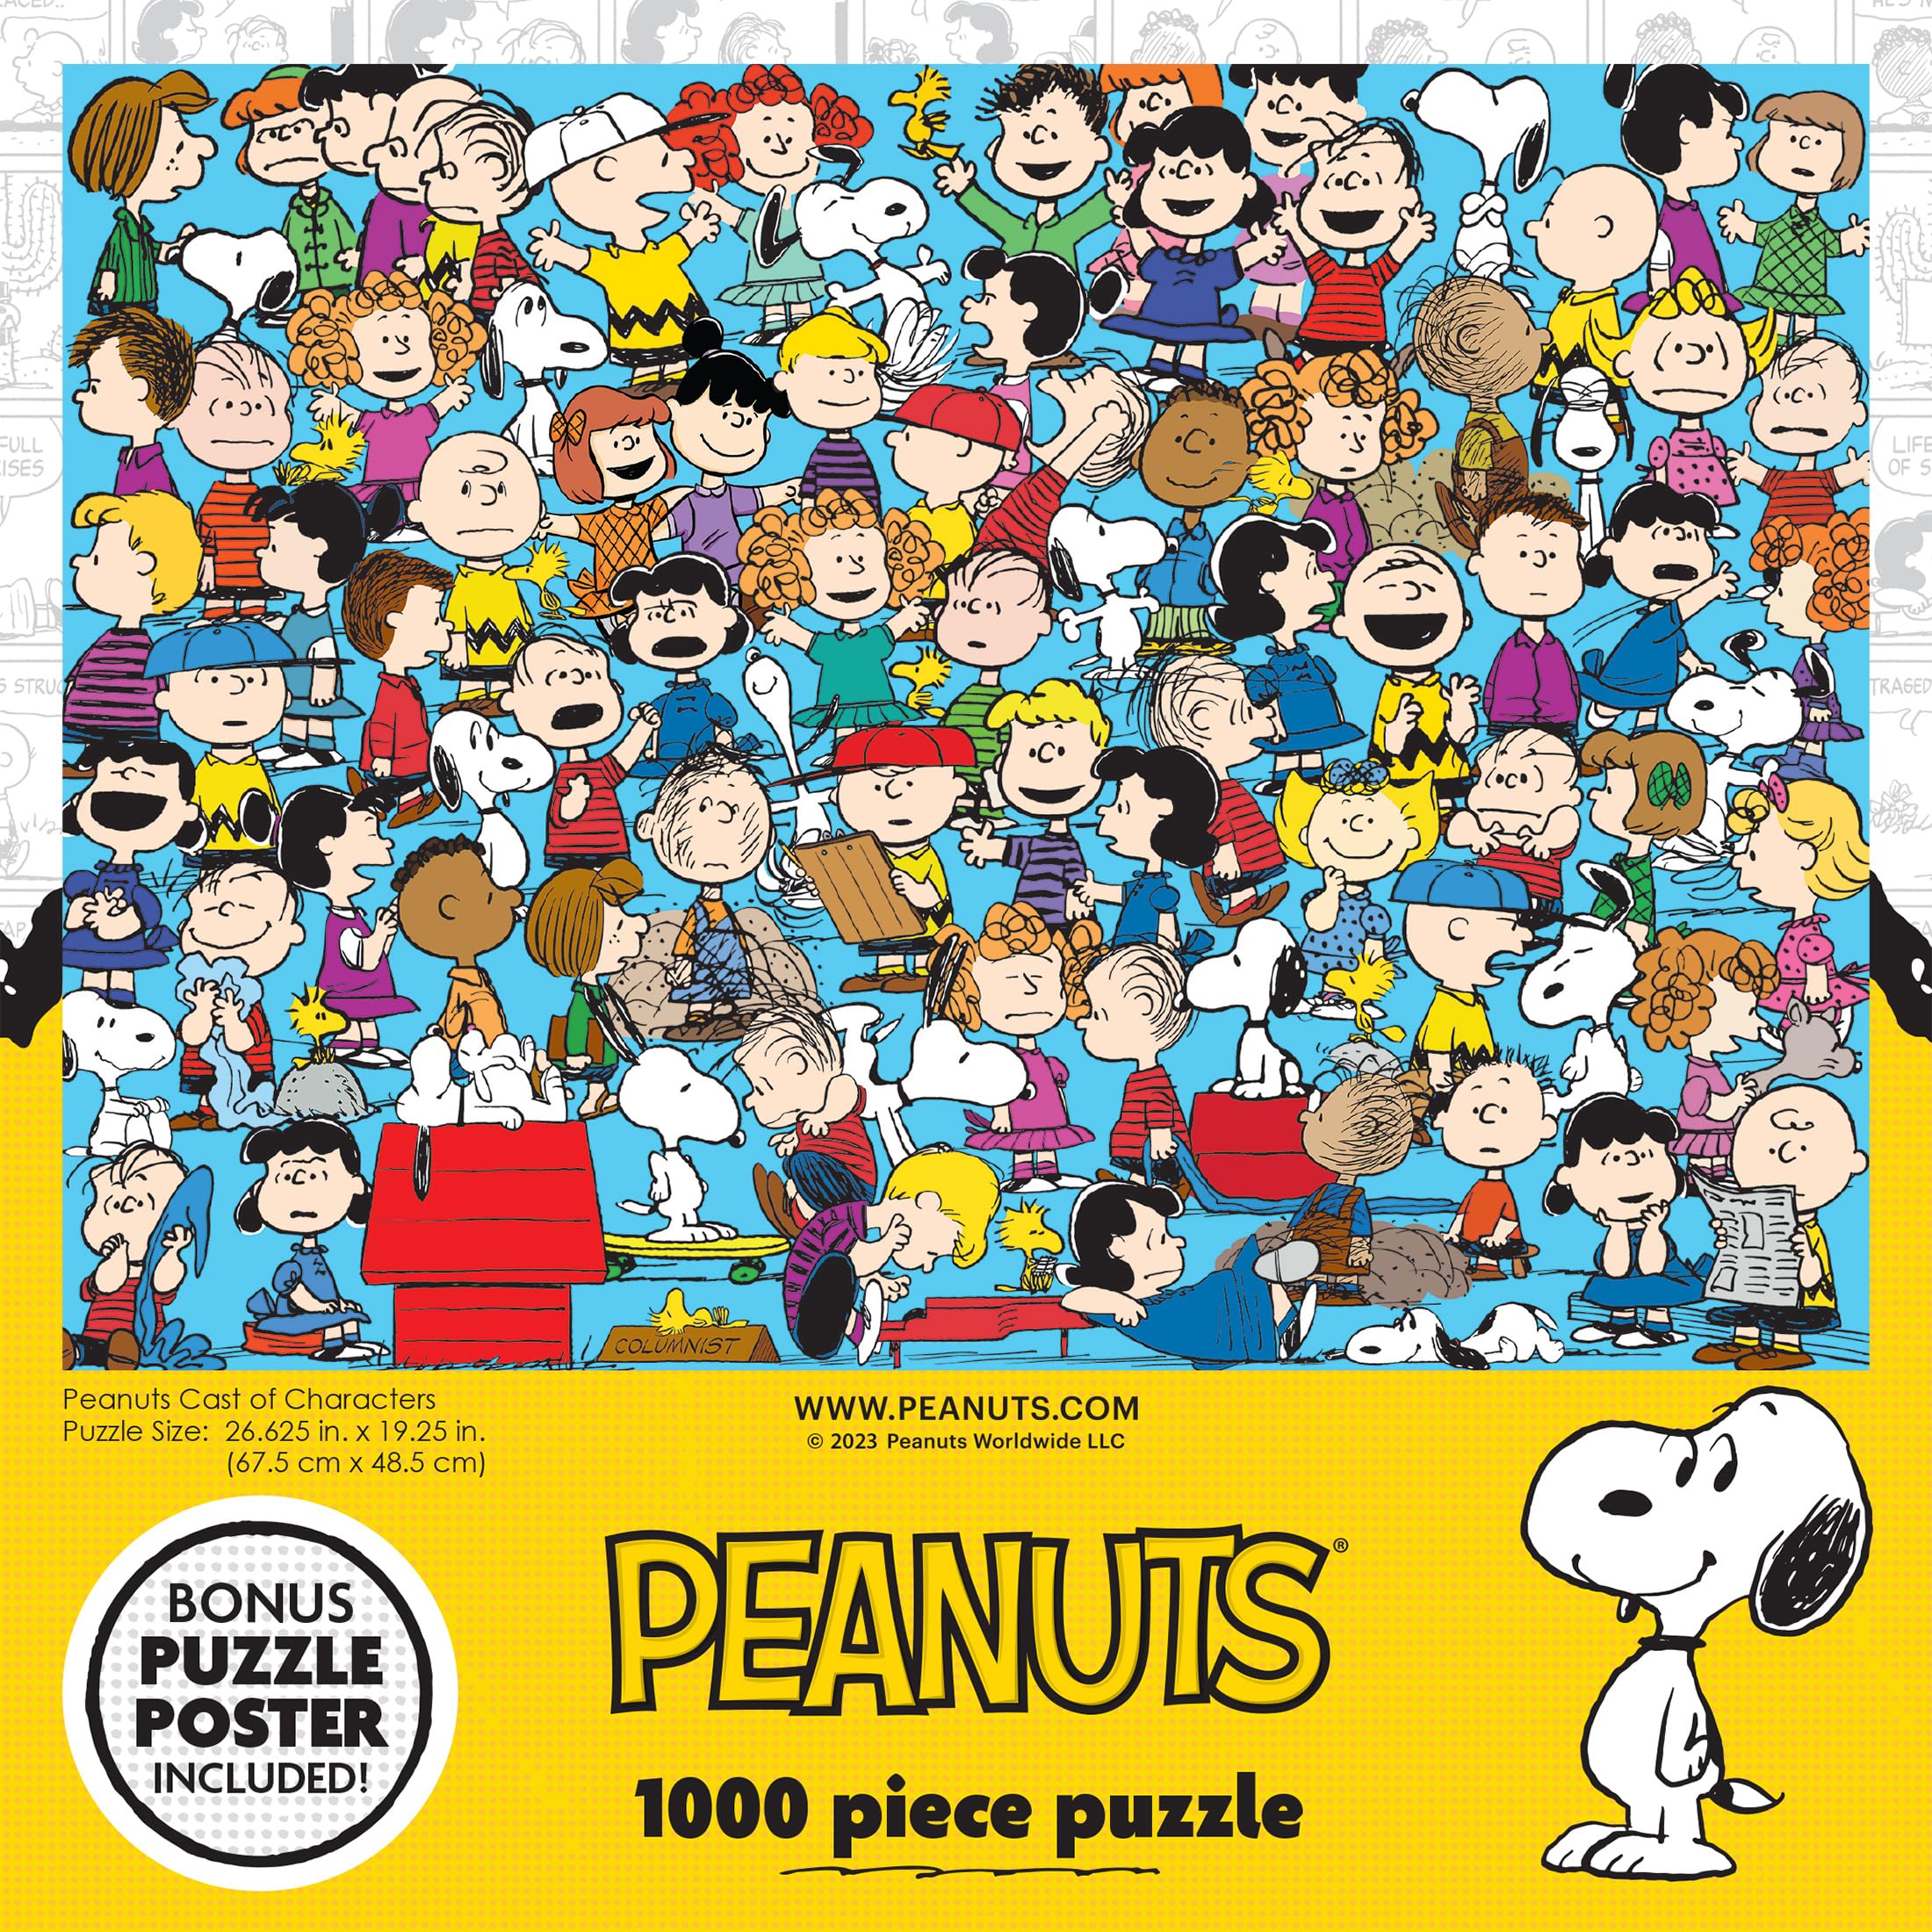 Cra-Z-Art - RoseArt - Peanuts - Cast of Characters - 1000 Piece Jigsaw Puzzle